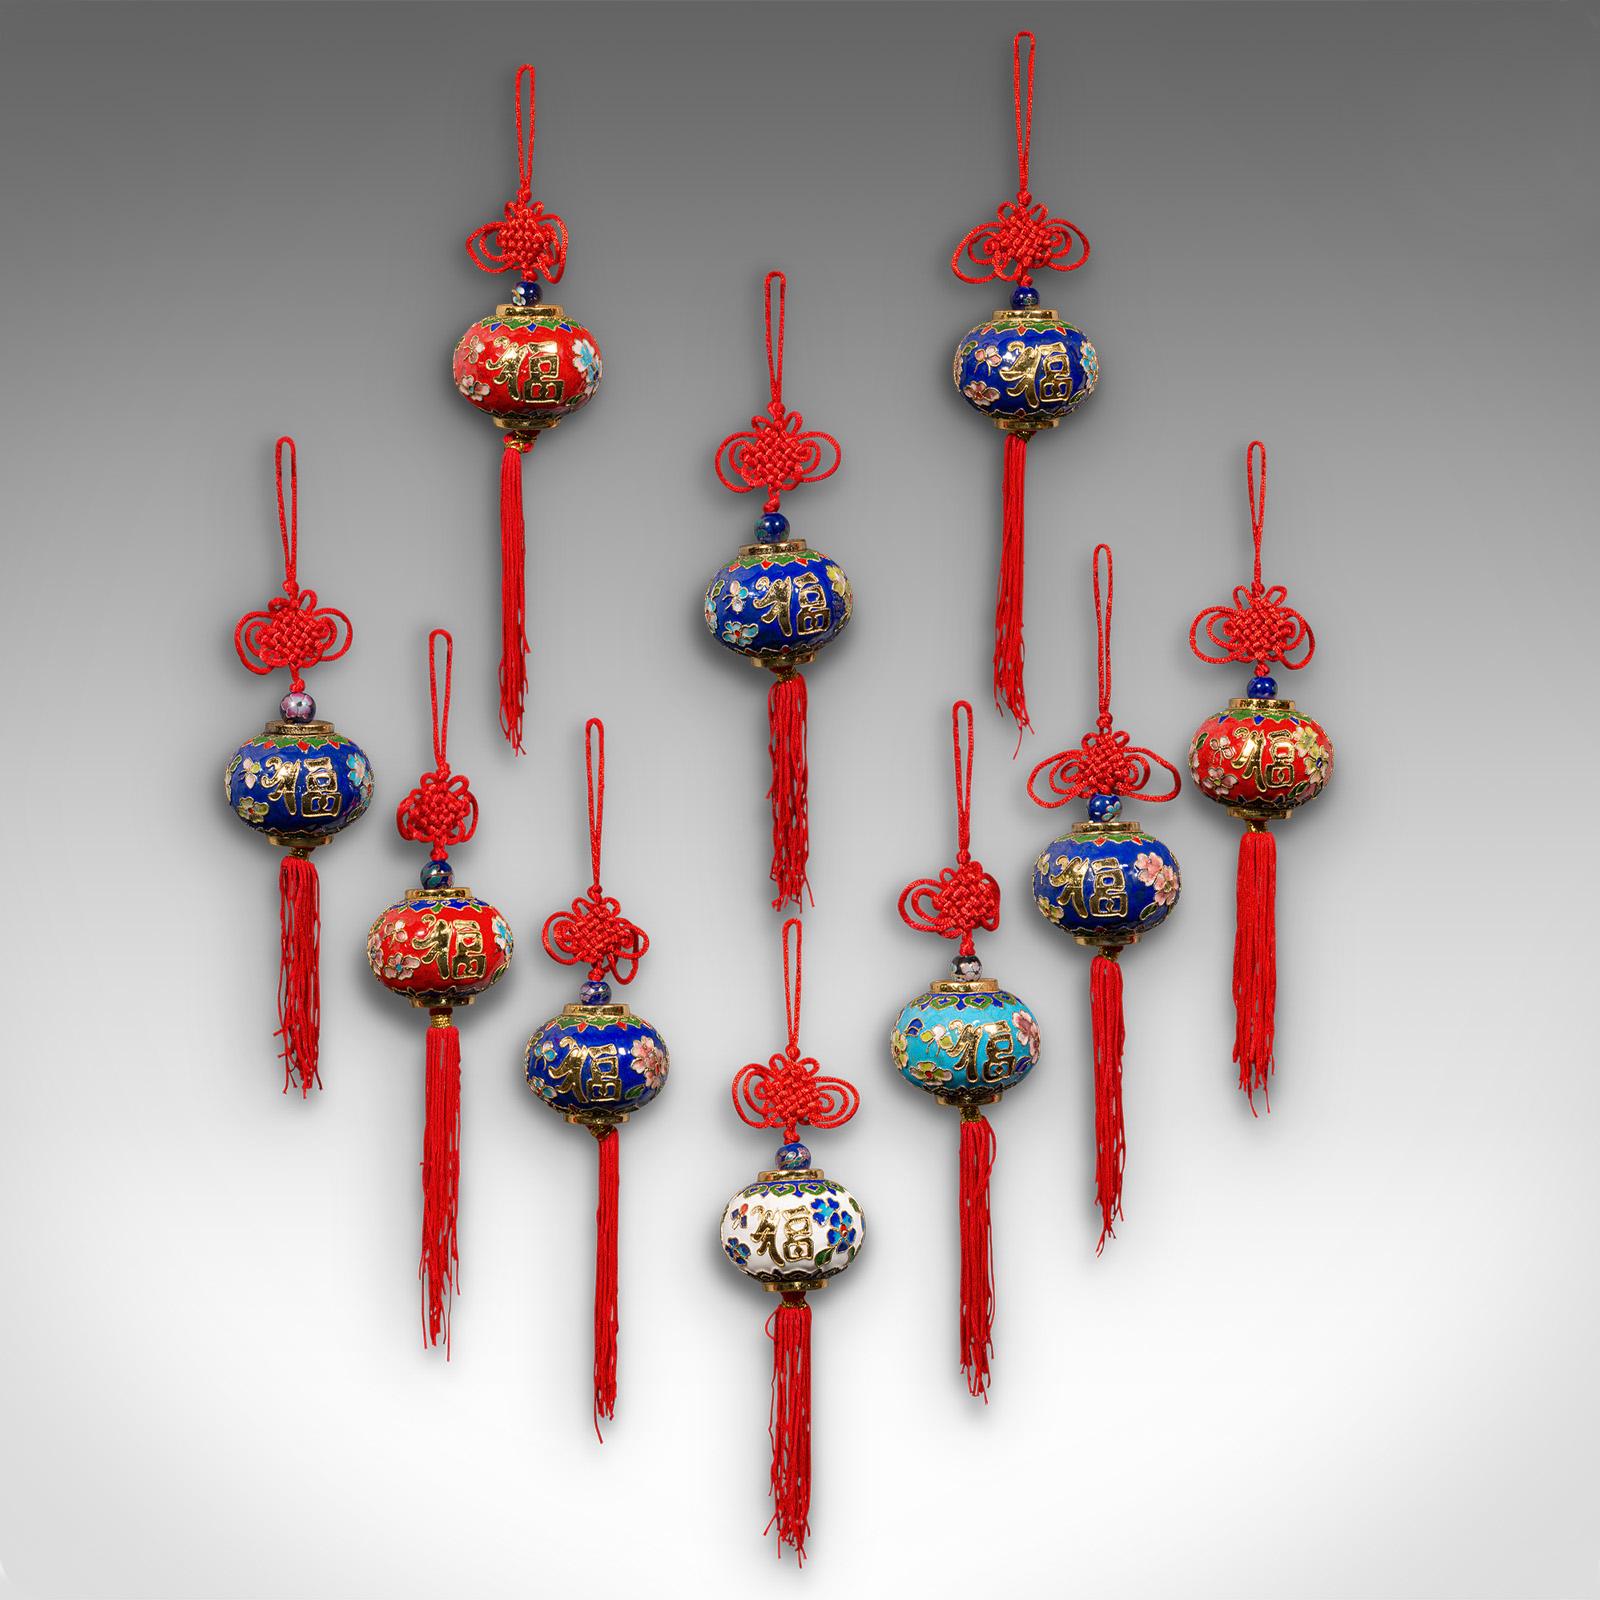 This is a set of 10 vintage festival lanterns. A Chinese, decorative tree bauble with Oriental motif, dating to the late 20th century, circa 1970.

Delightfully colourful, extravagant festival decor
Displays a desirable aged patina and in good